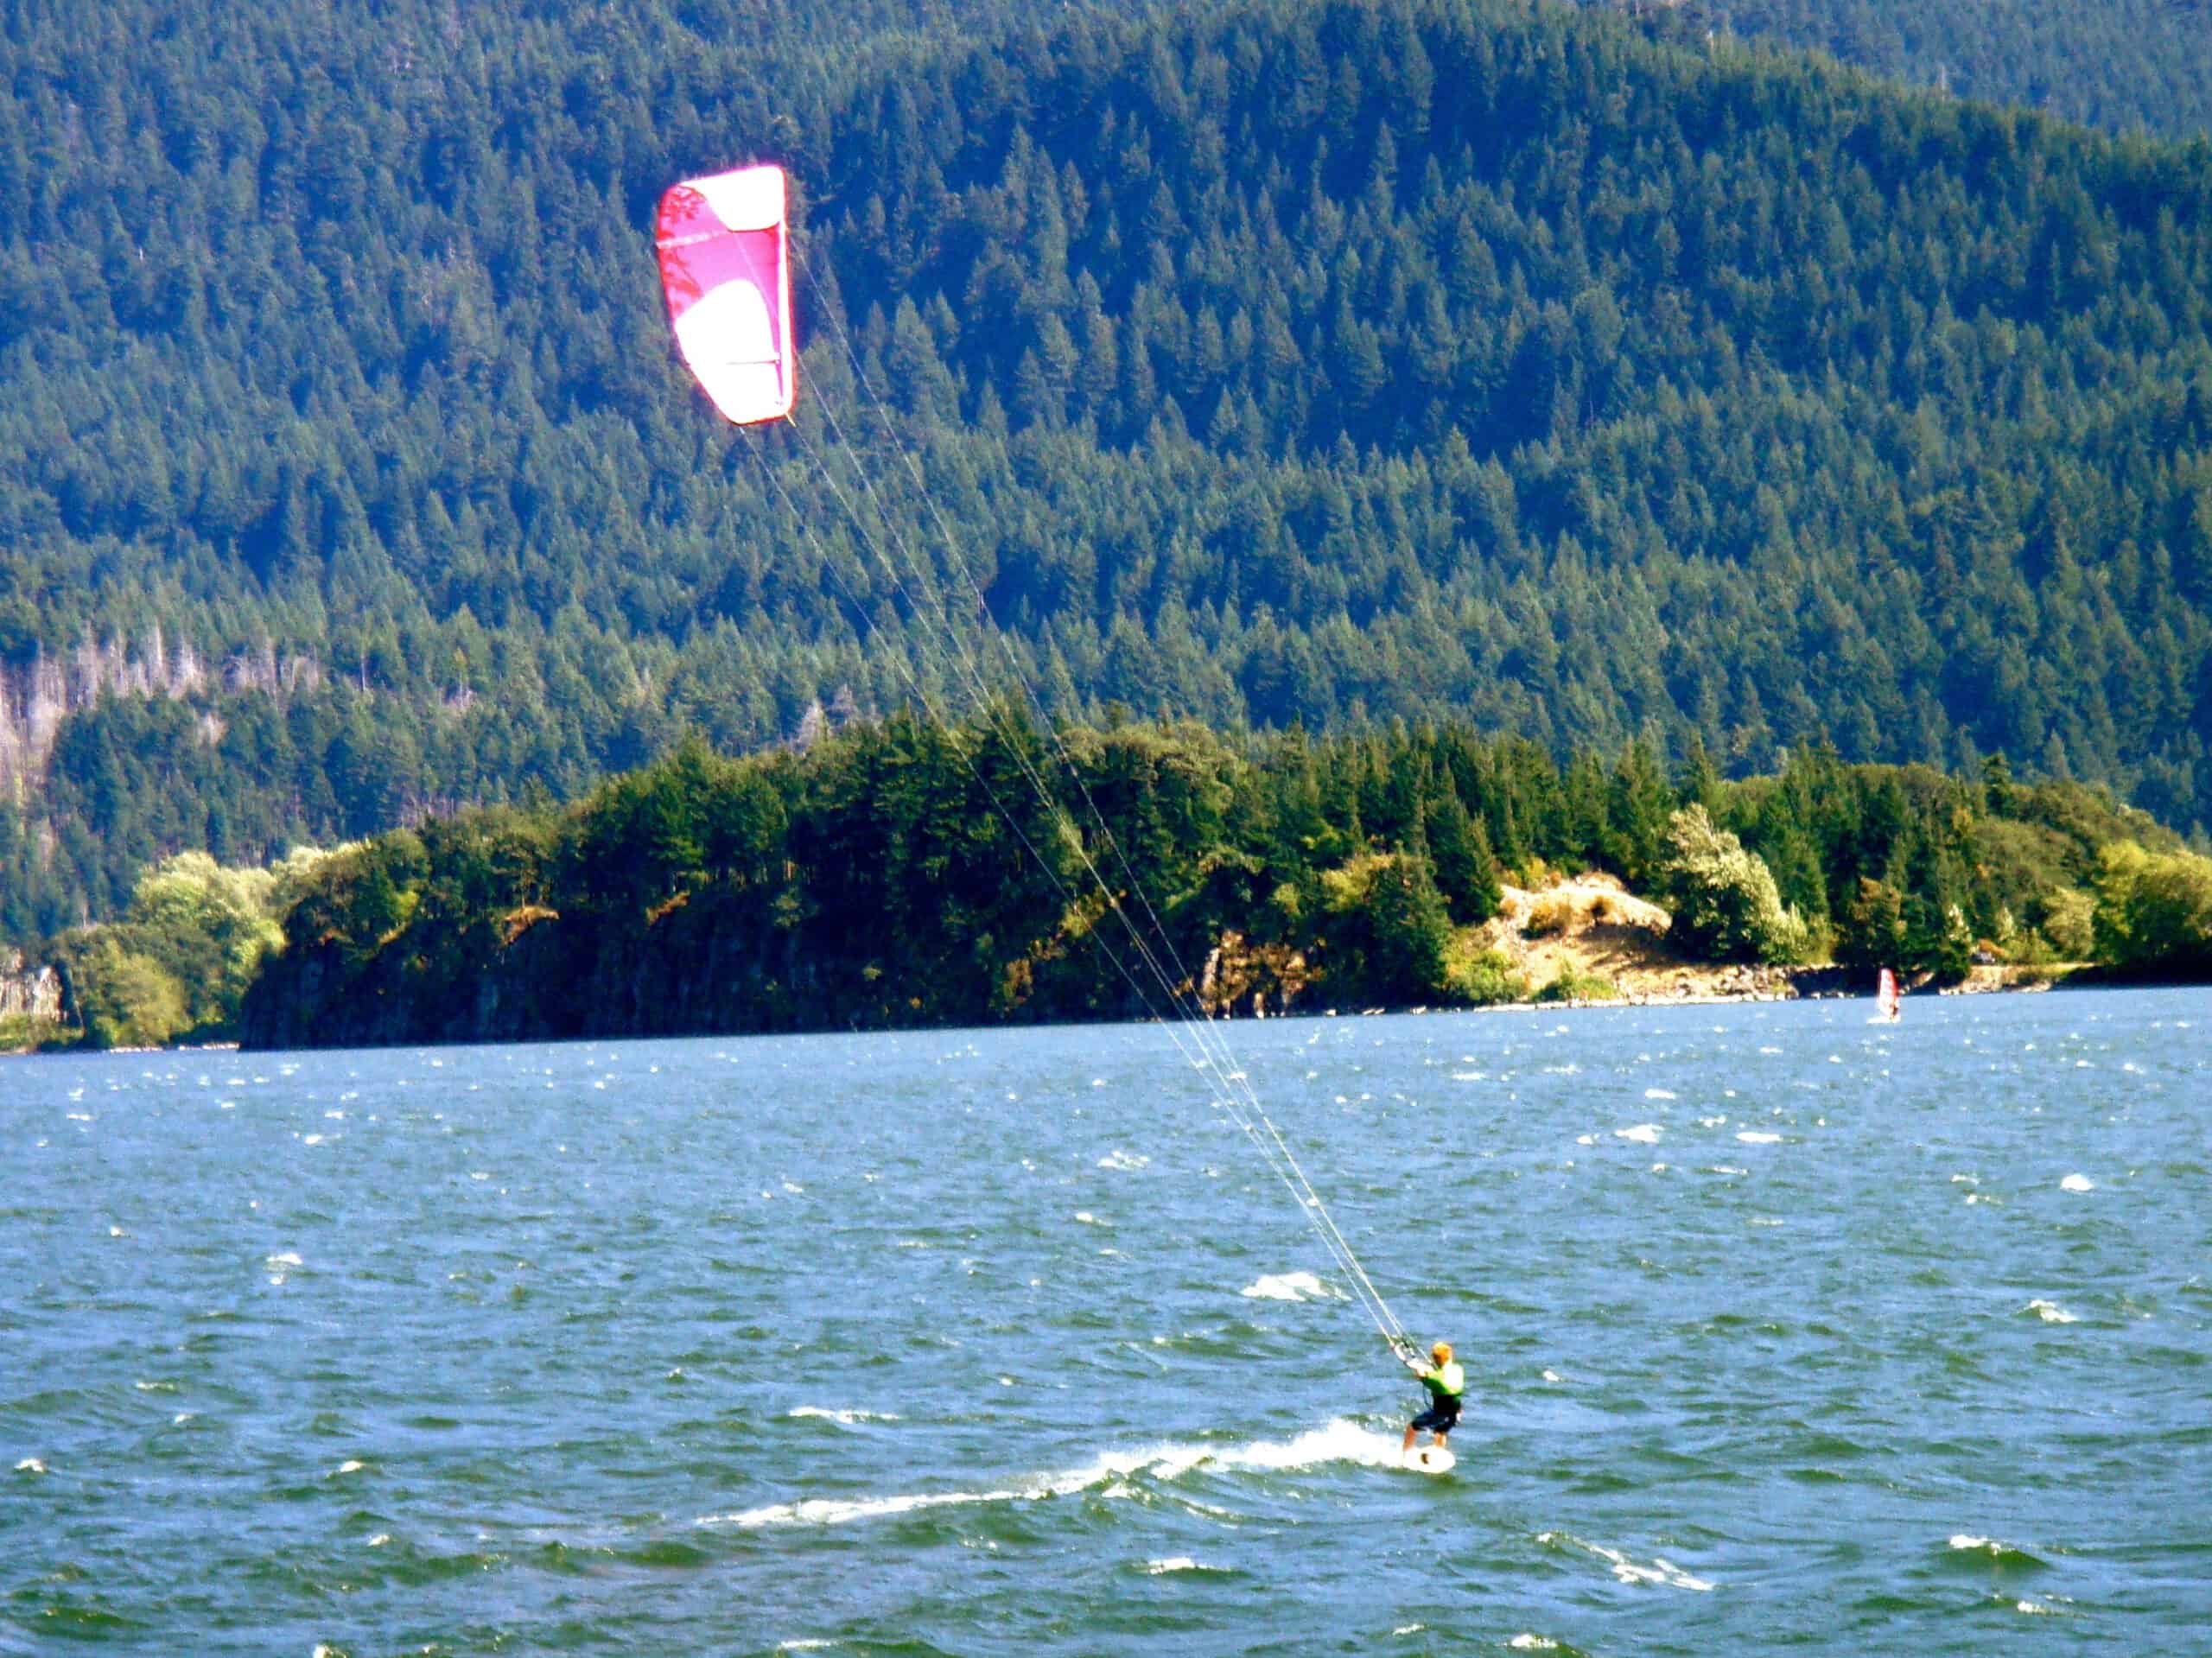 <p>Hood River, Oregon, is a small town on the Columbia River. The town is most famous for being the “Windsurfer capital of the World.” It’s a unique spot in the always-windy Columbia River Gorge and makes for excellent windsurfing. But that is not the only water sport that locals enjoy; there is wind foiling, kayaking, and more in this area. It is close to Portland, just one one-hour drive, and the surrounding mountains have excellent hiking trails. Plus, the culinary scene here is quite impressive for such a small town. And there are several breweries, so if windsurfing isn’t your thing, you can enjoy a beer and watch the water. Hood River makes a great day trip, and it’s worth the time to come and explore.</p>